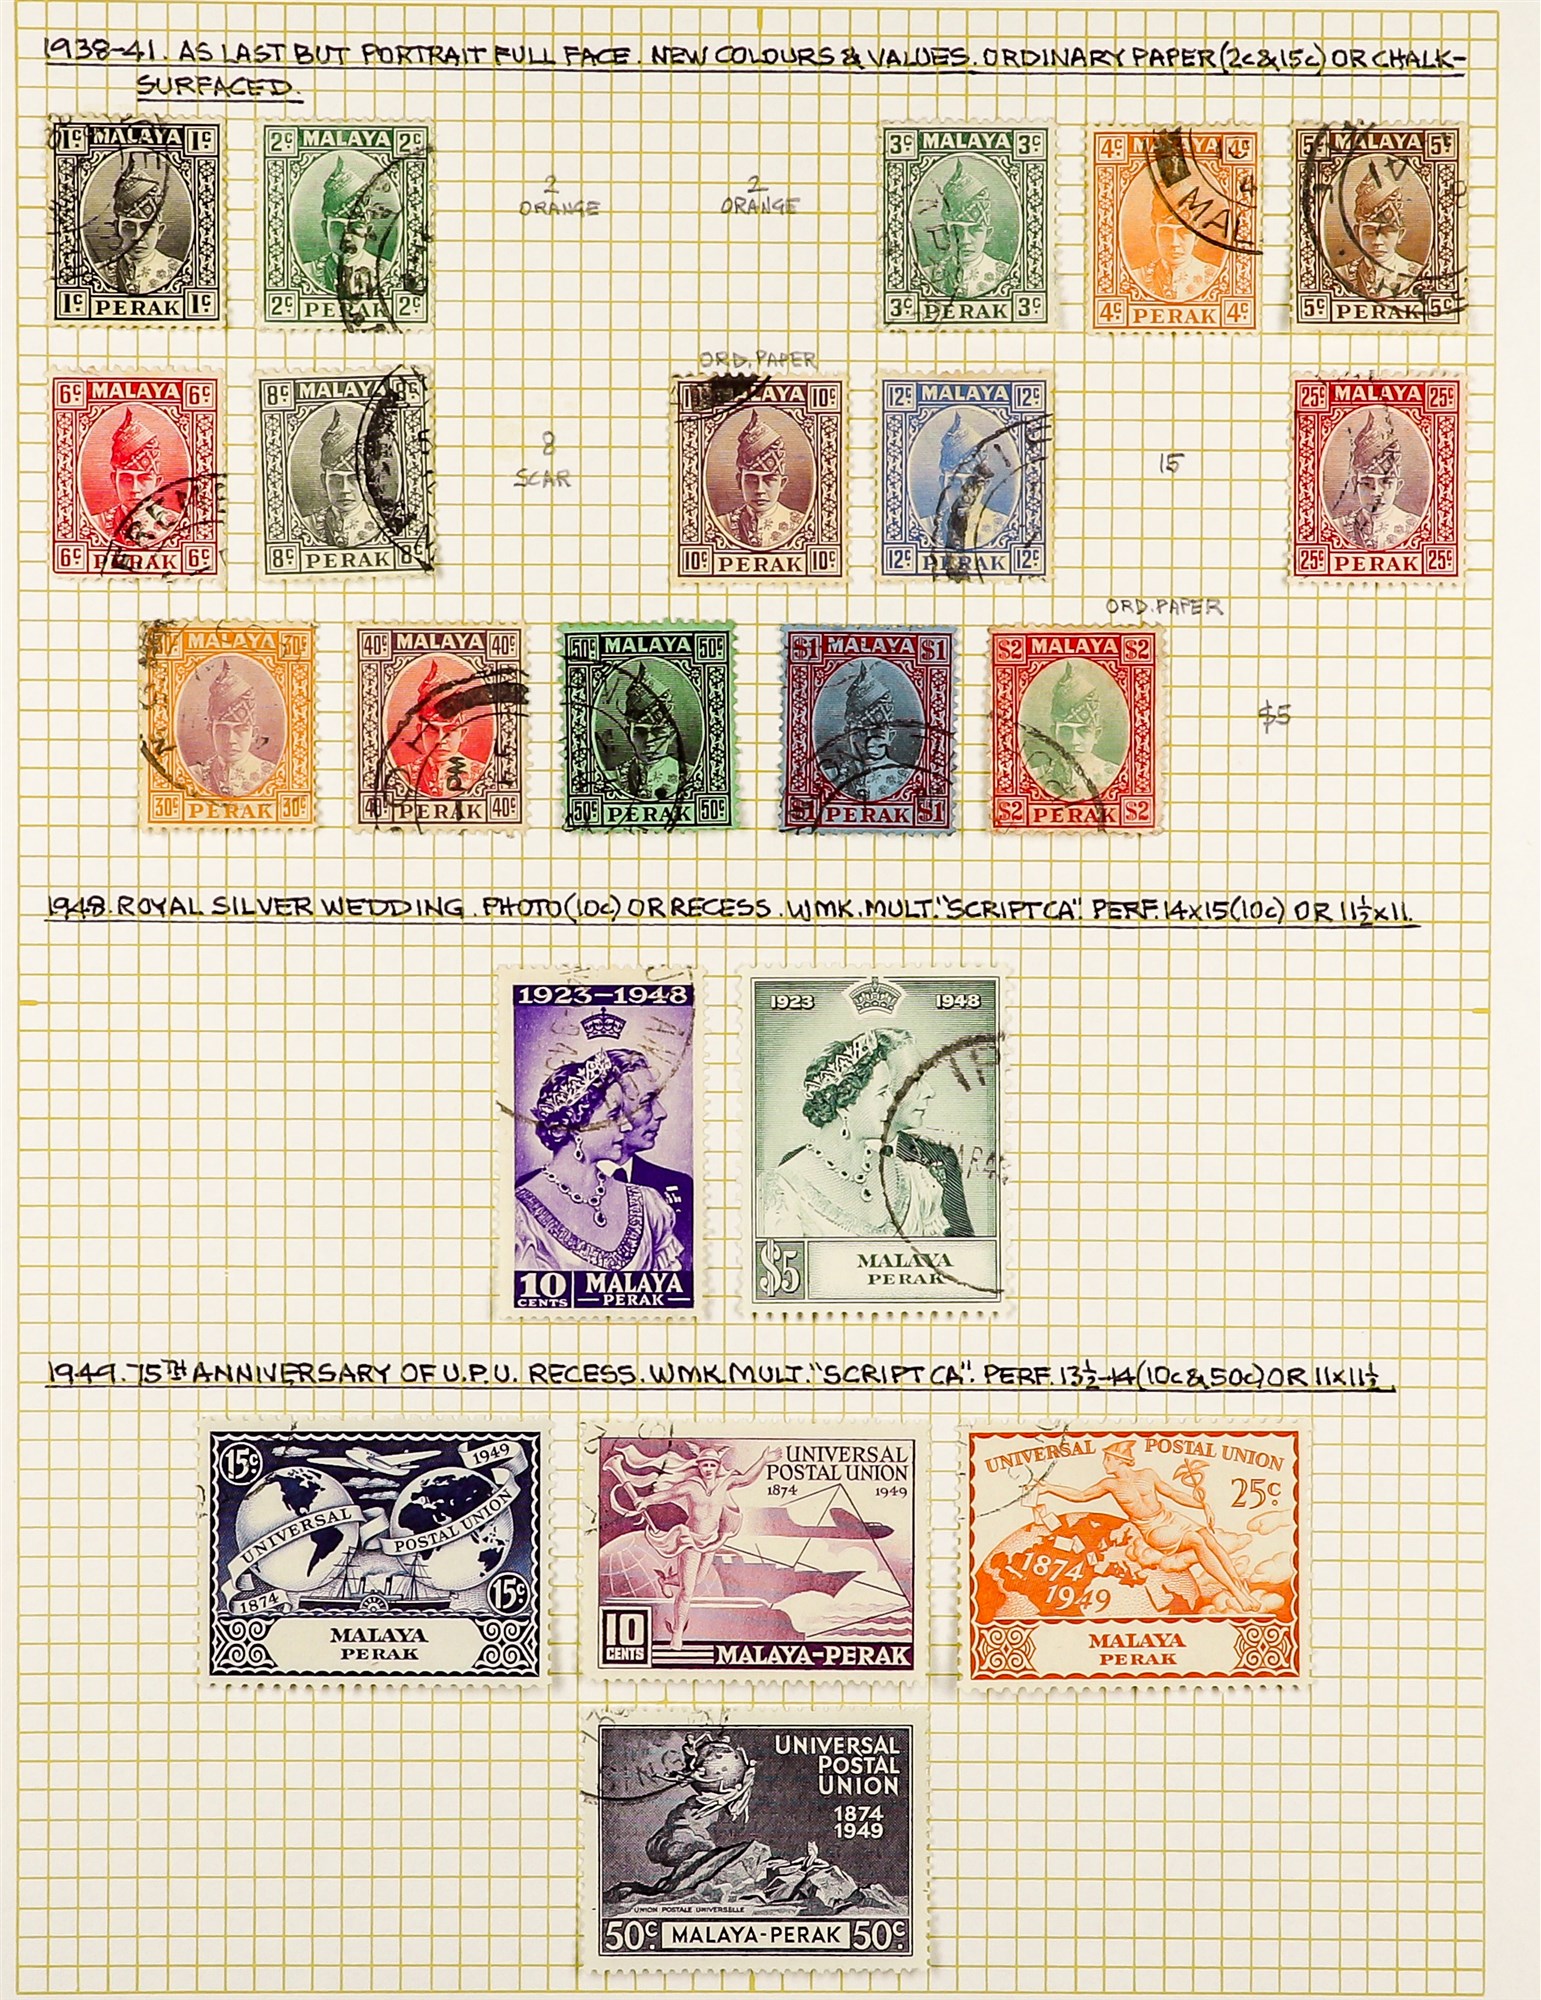 MALAYA STATES PERAK 1884 - 1965 COLLECTION of over 100 chiefly very fine used stamps on several - Image 4 of 7